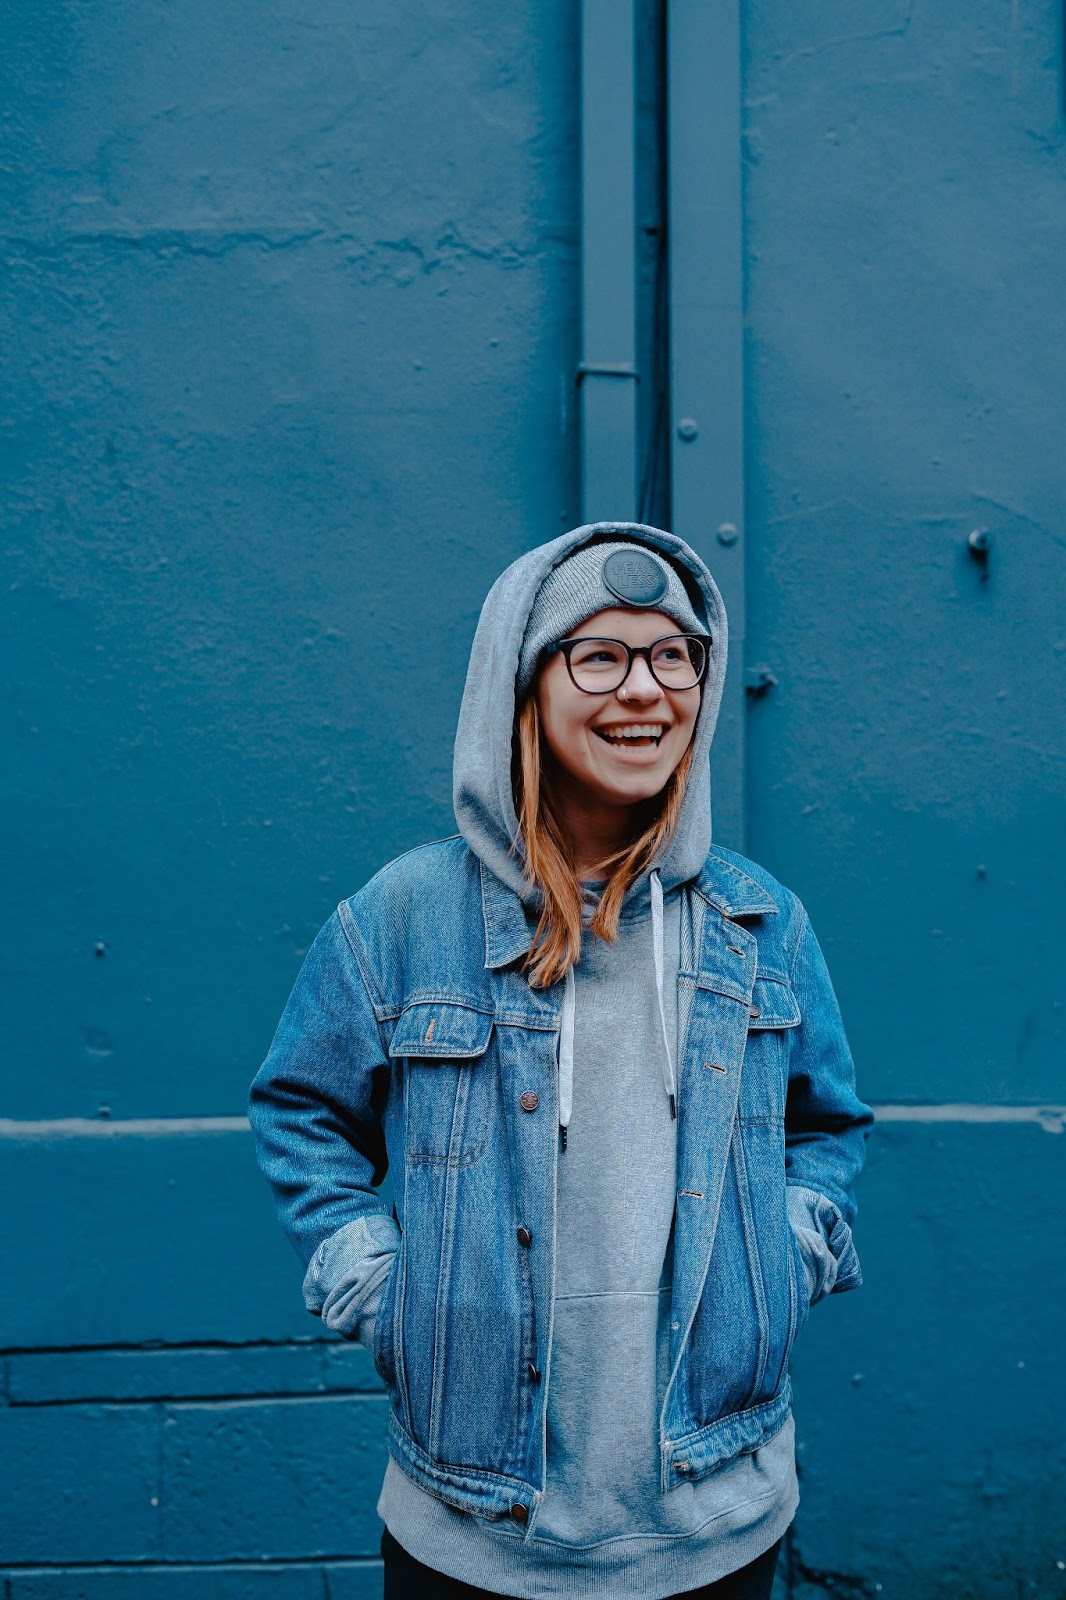 A picture of a smiling teenage girl in glasses, wearing a jean jacket and gray hoodie against a blue background.